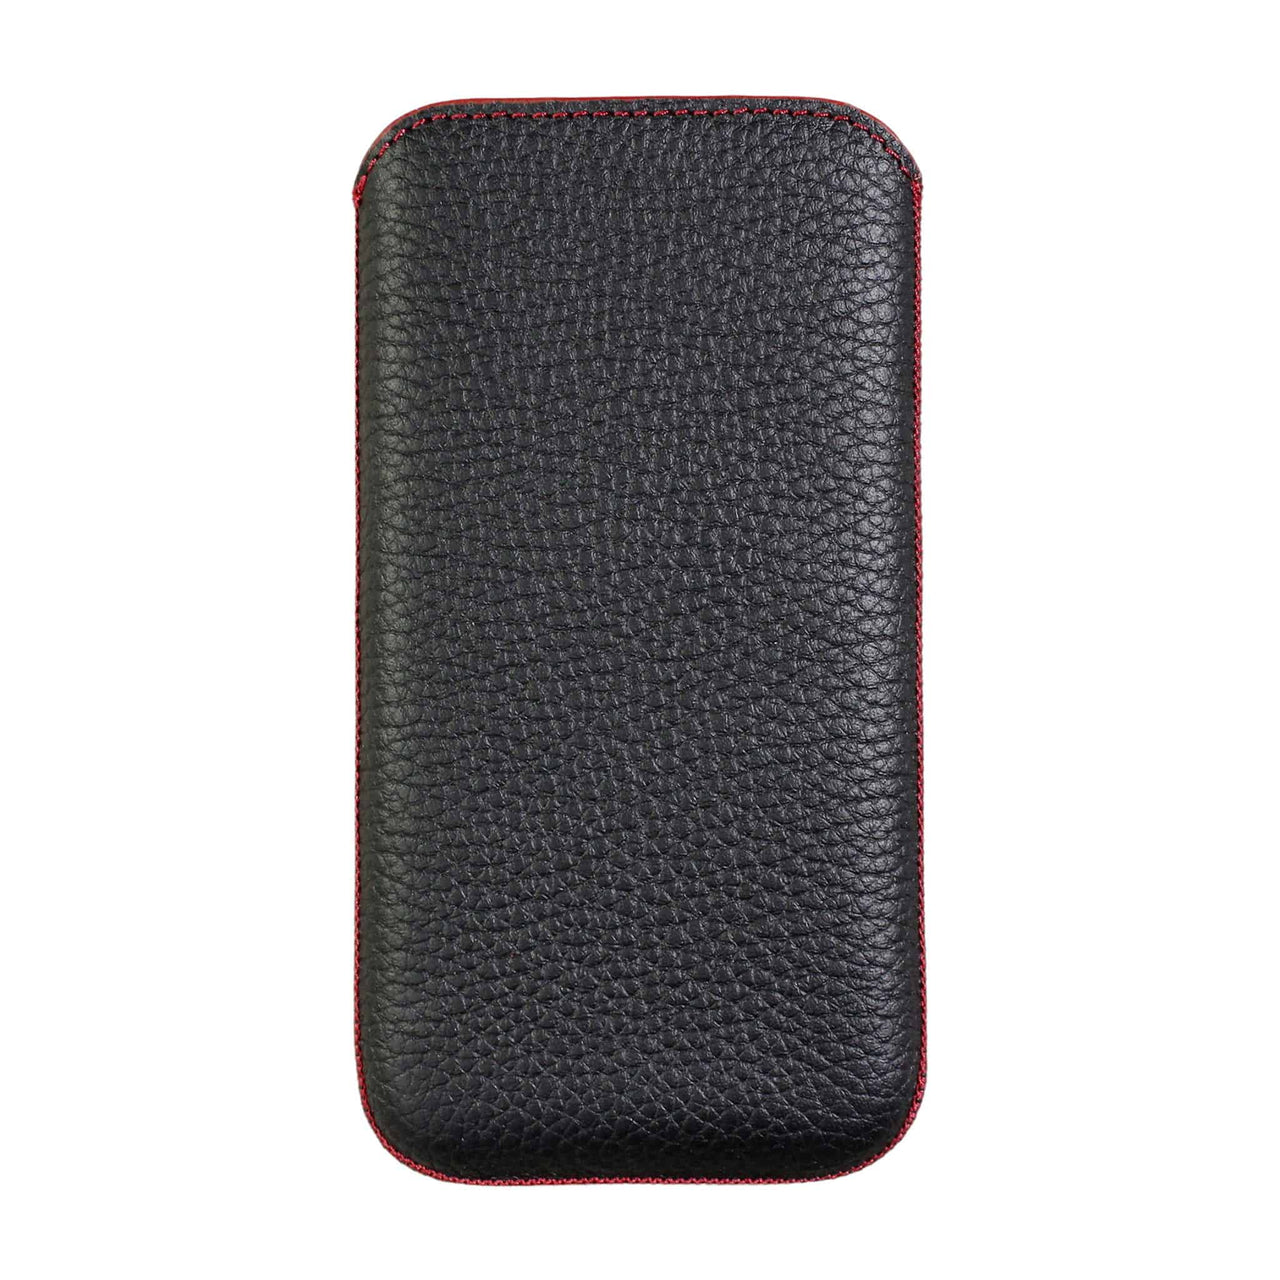 Samsung Galaxy A52 / A52 5G Genuine Leather Pouch Sleeve Case | Artisanpouch